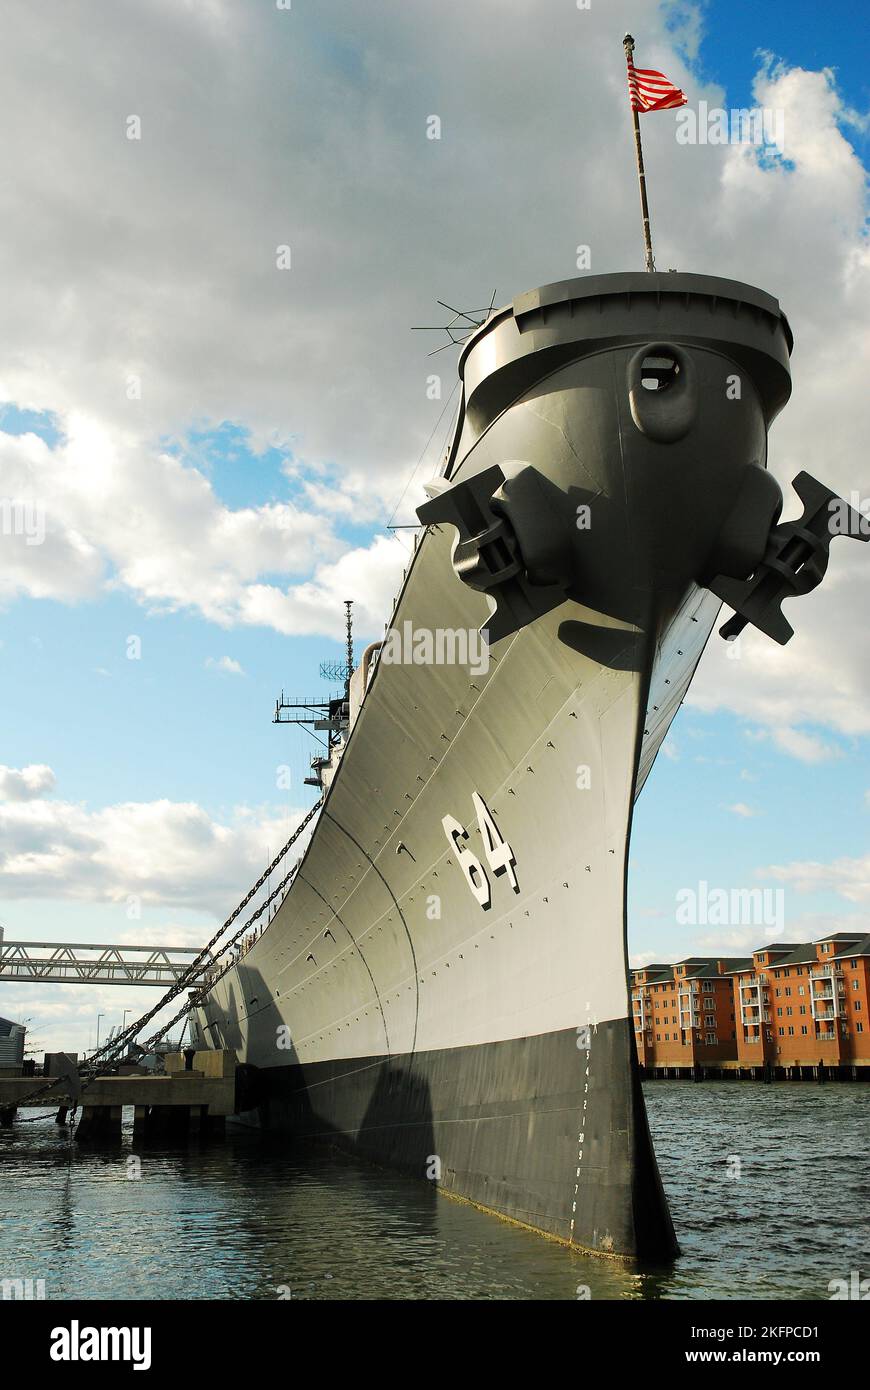 The USS Wisconsin, a decommissioned navy ship, is moored along the waterfront of Norfolk, Virginia Stock Photo